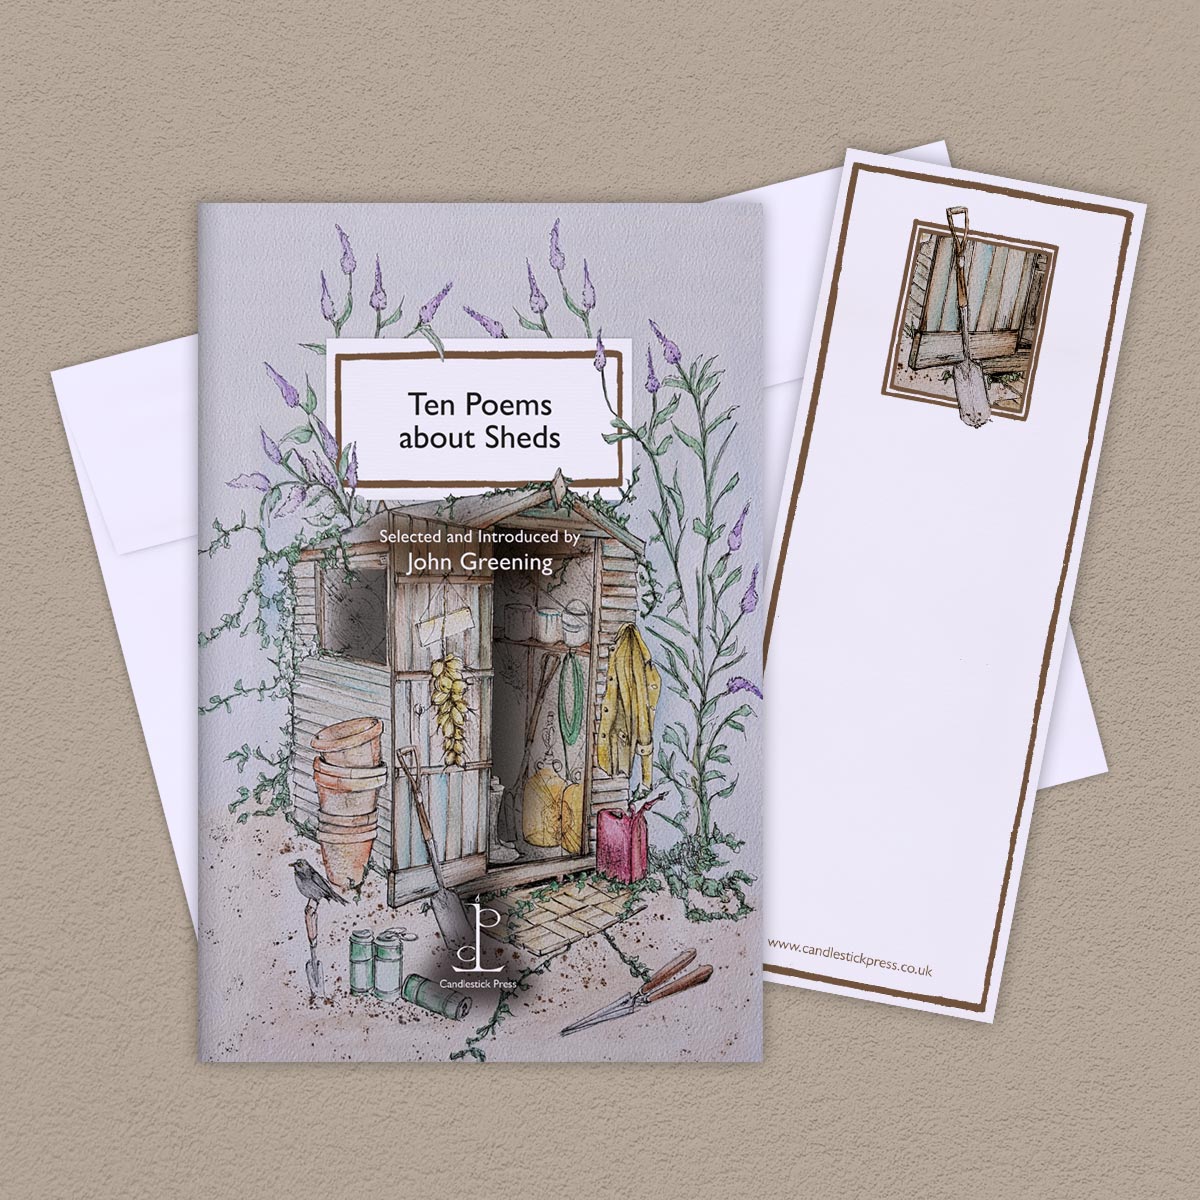 The Poem Pamphlet, 'Ten Poems about Sheds' sits on a beige background with the bookmark and white envelope.